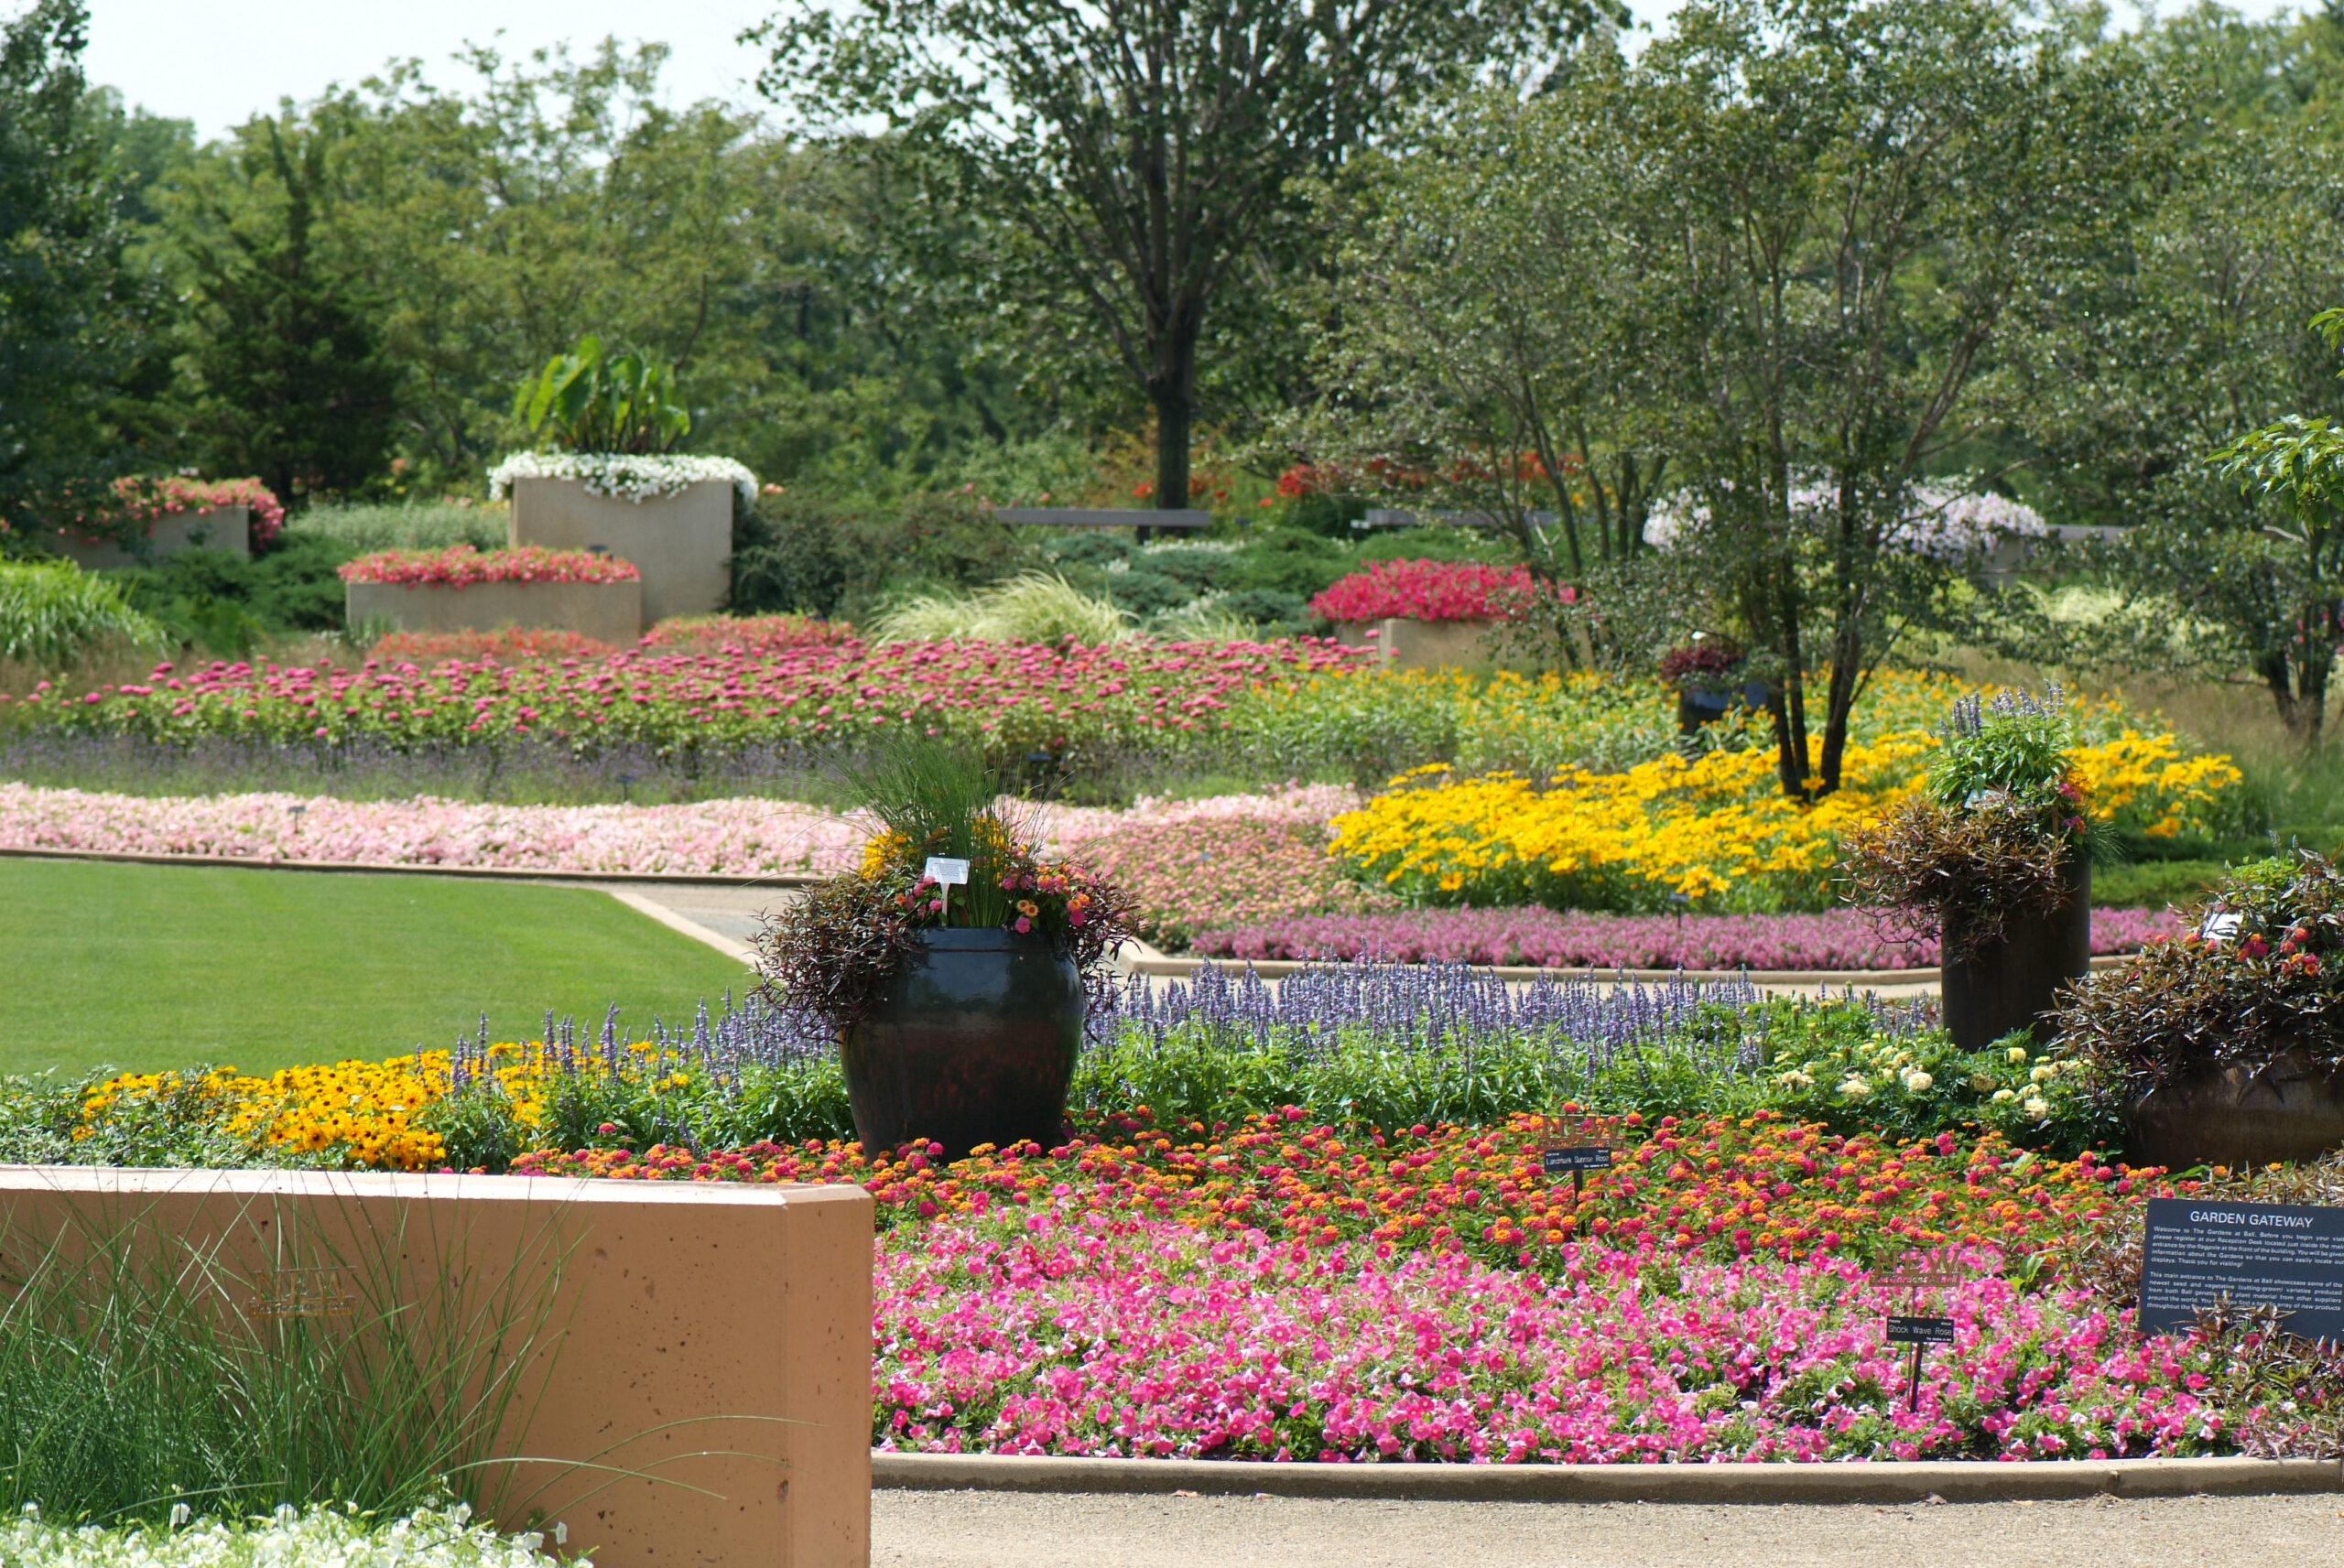 Gardens at Ball Horticultural Headquarters